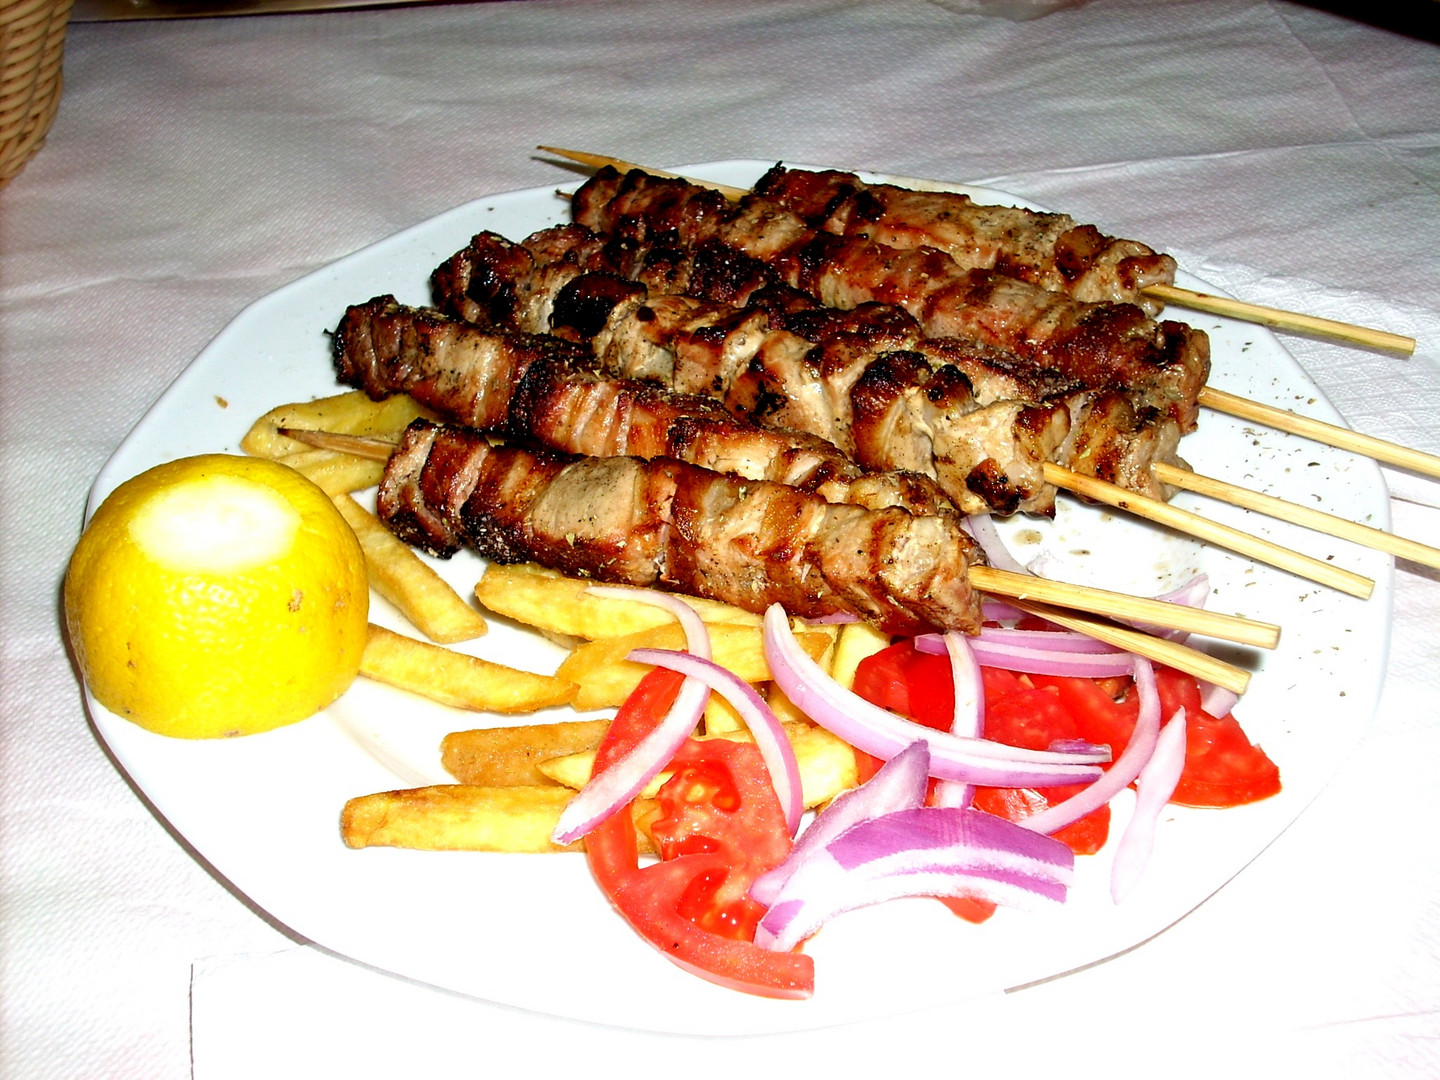 This is the typical Greek Souvlaki